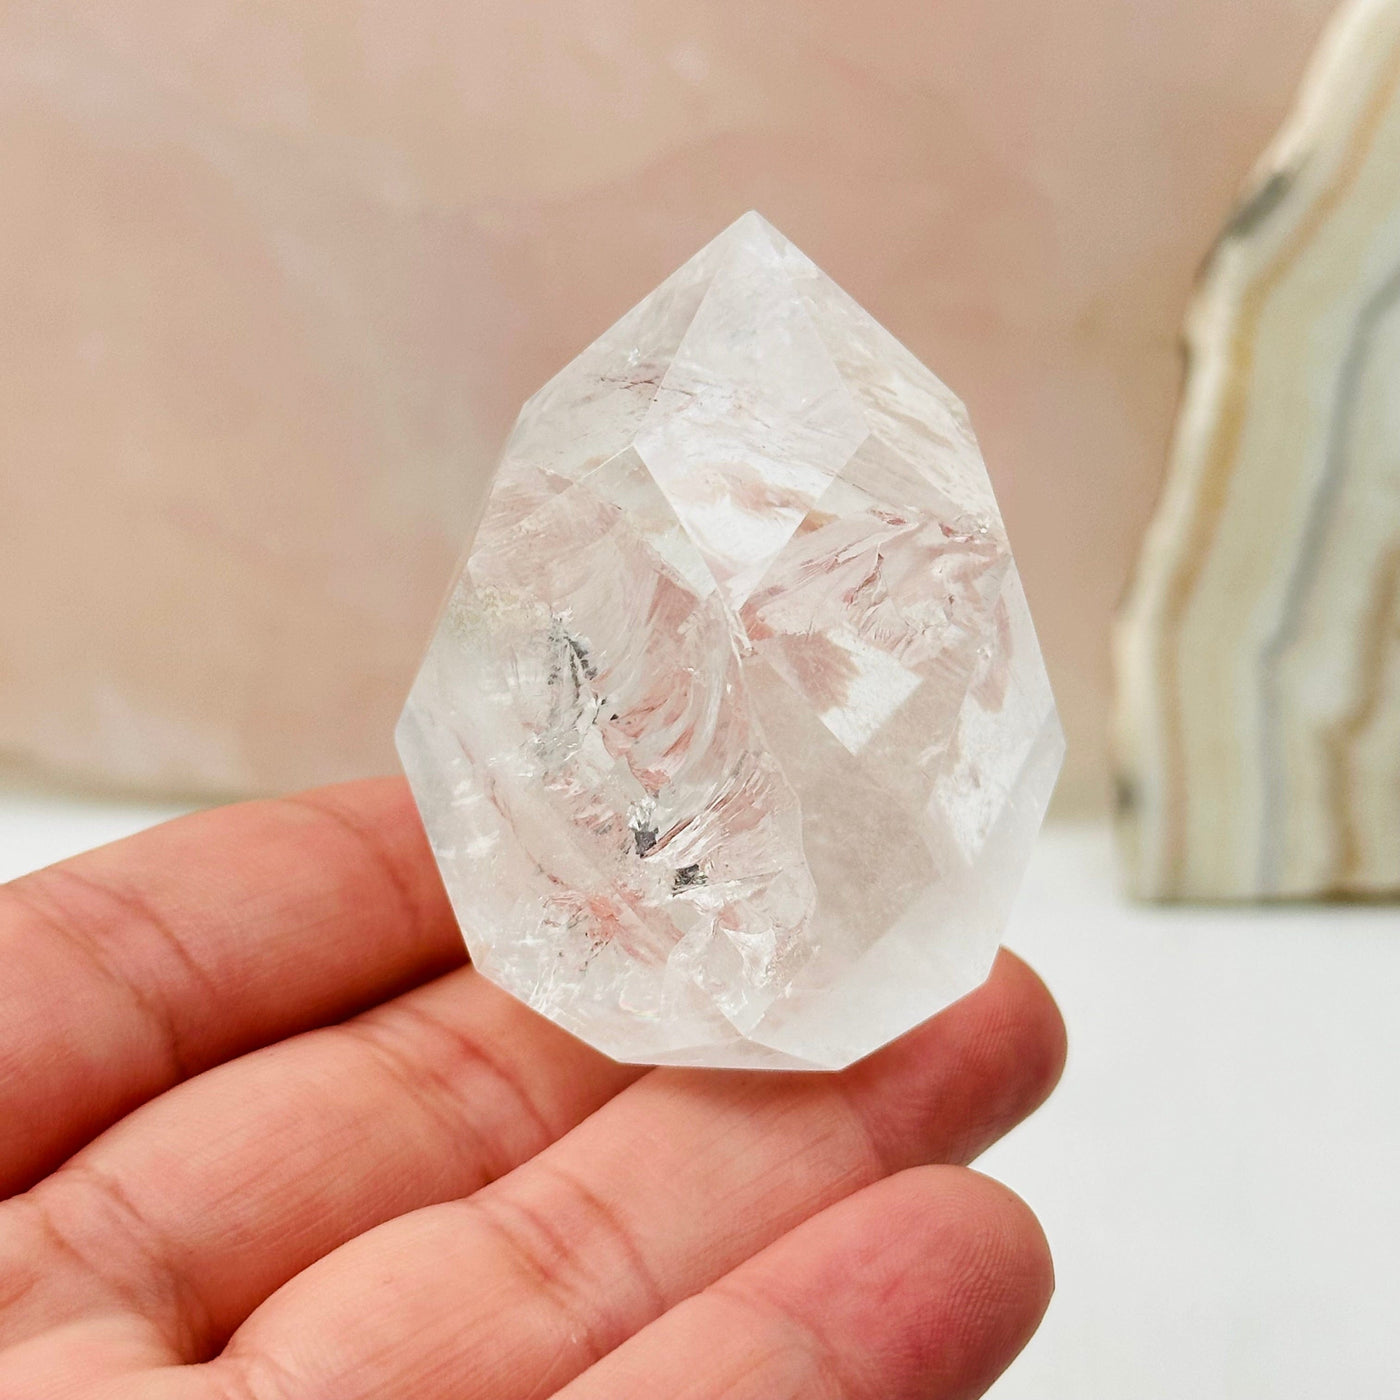 Faceted Clear Quartz Crystal Egg Point in hand for size reference 